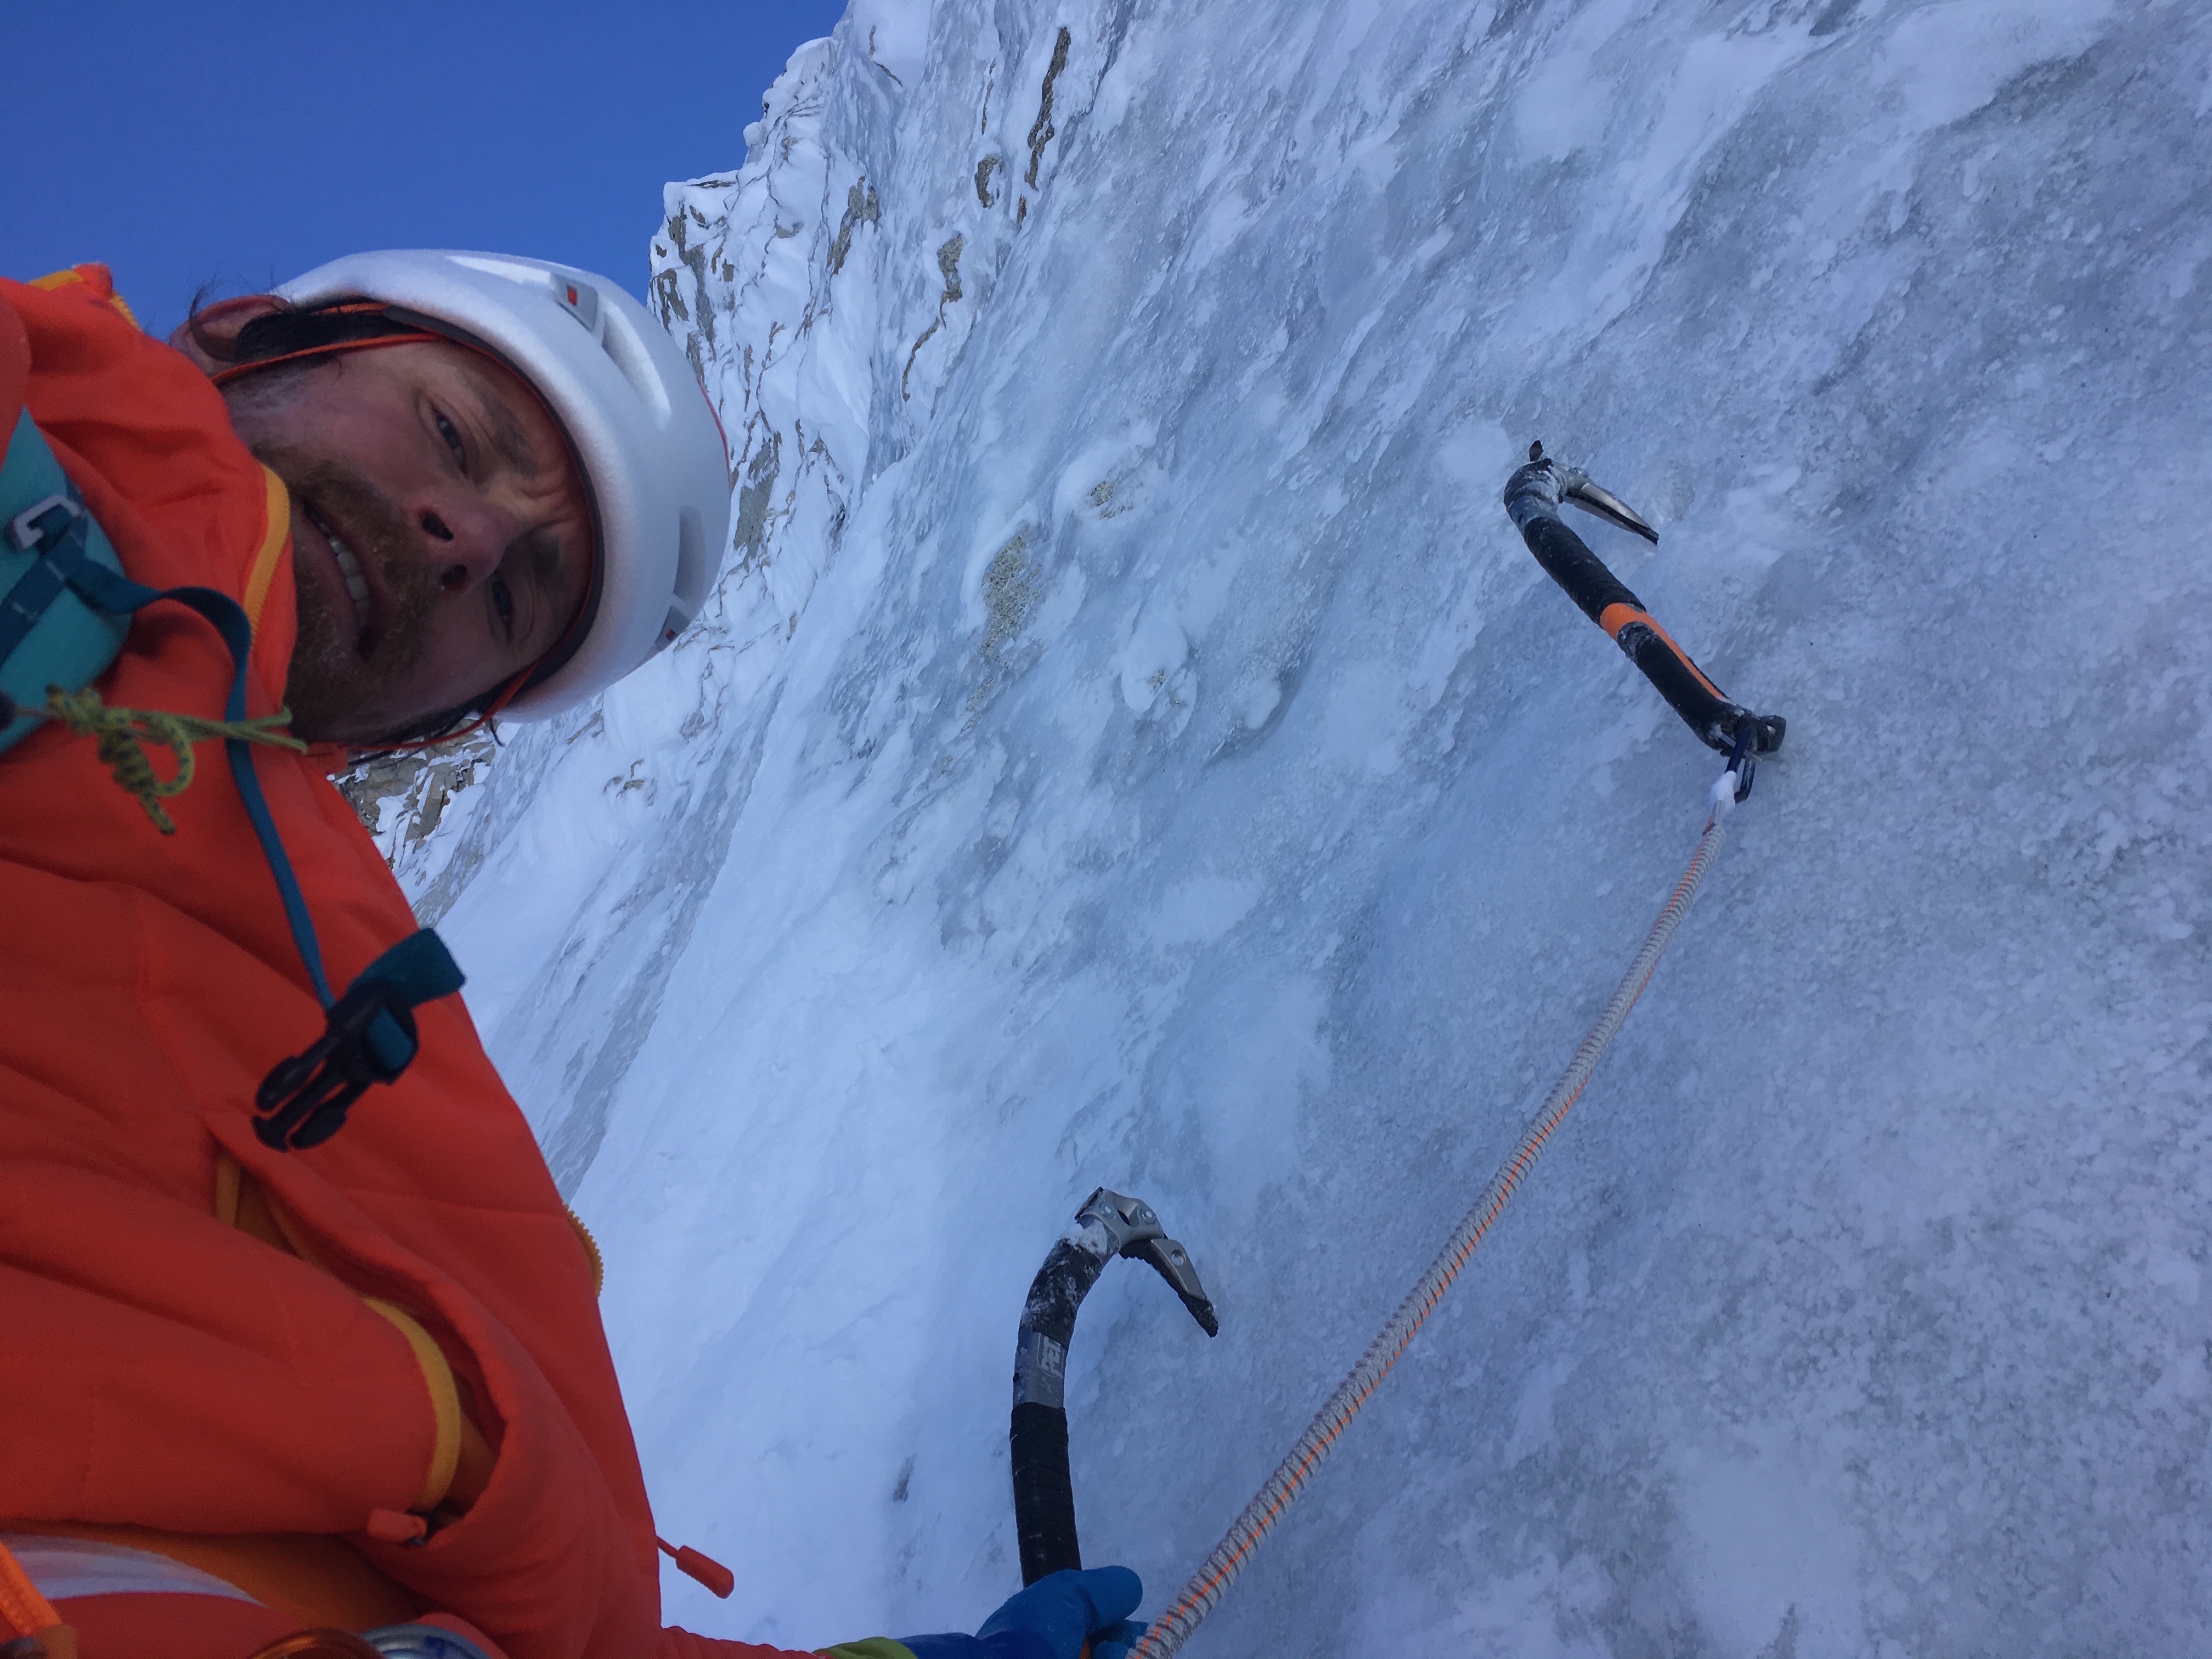 After a long rightward traverse on the second ice band, climbing some moderate ice to join the Bjoernberg-Ireland route. [Photo] Colin Haley